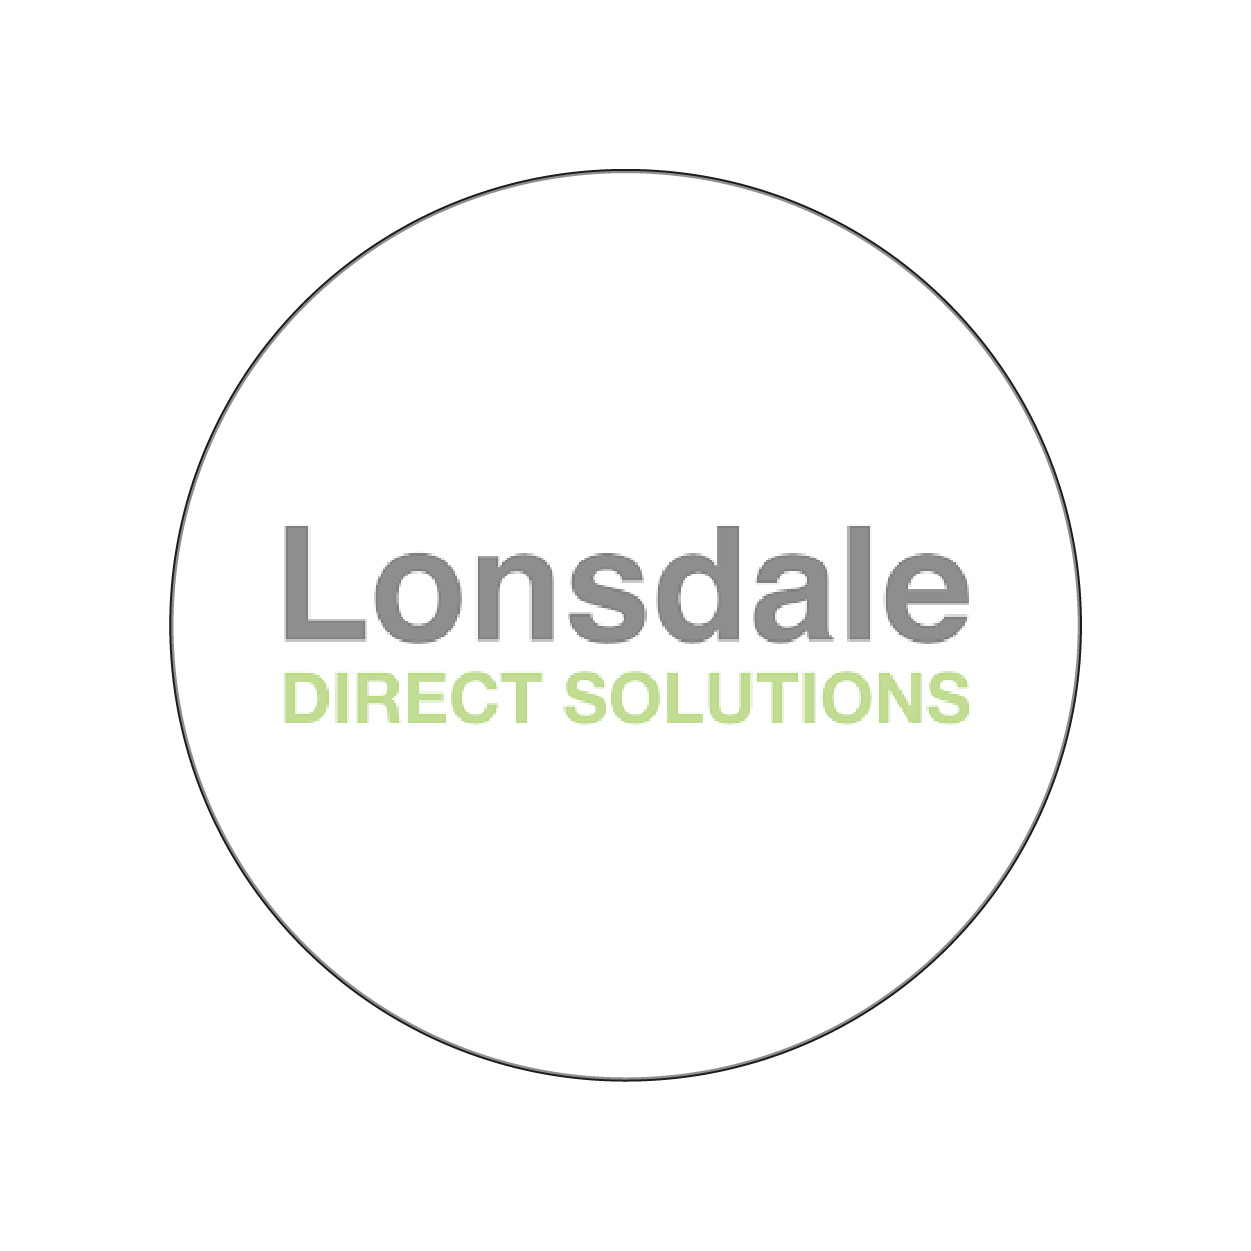 Lonsdale Direct